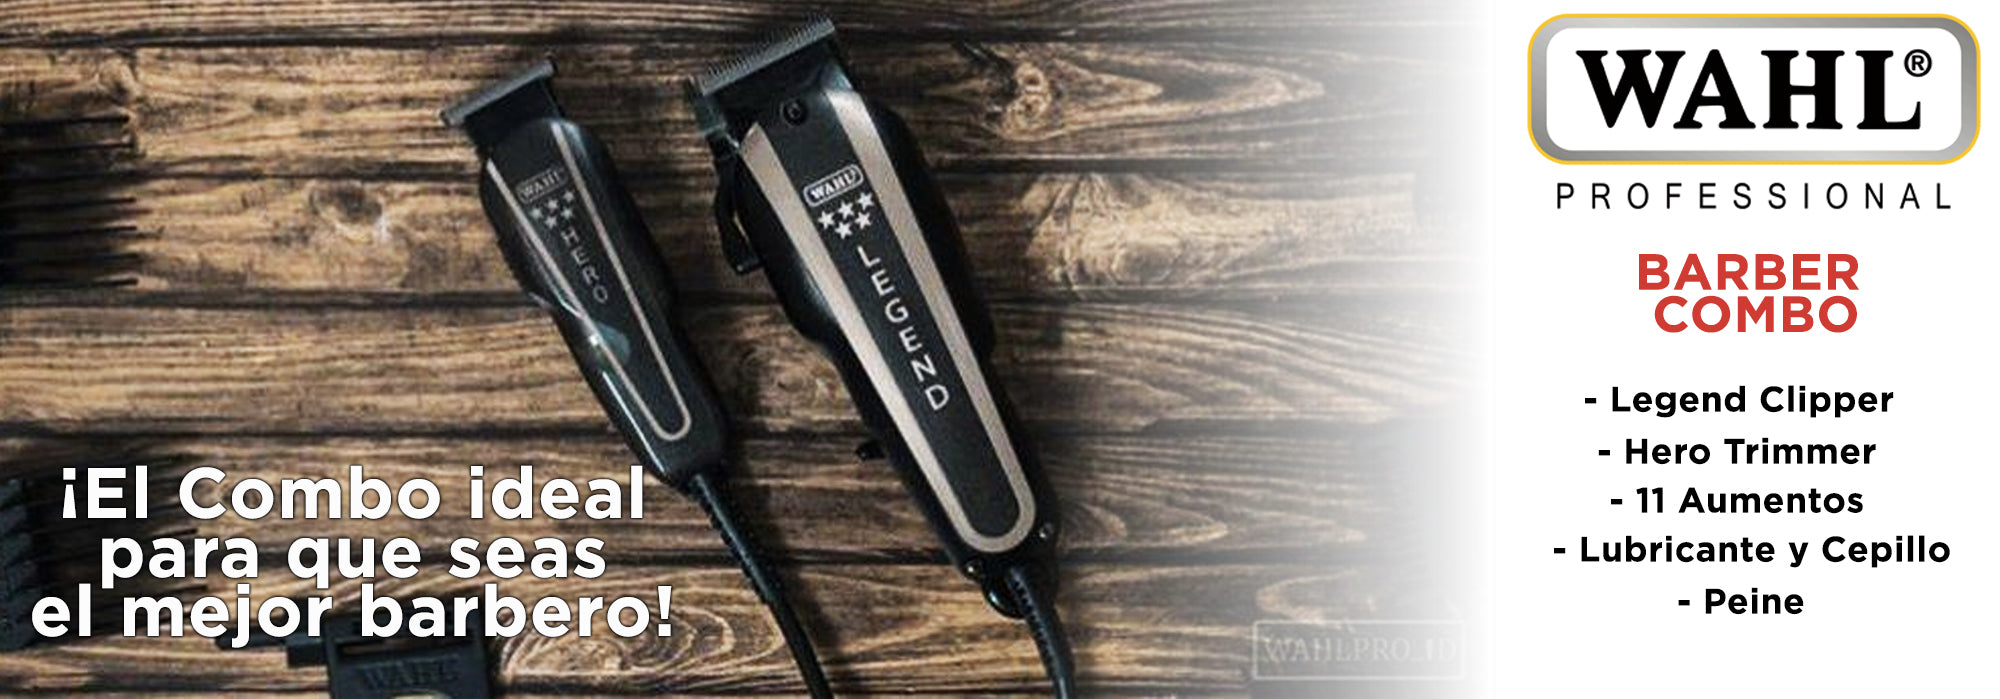 Barber Combo - Wahl Professional